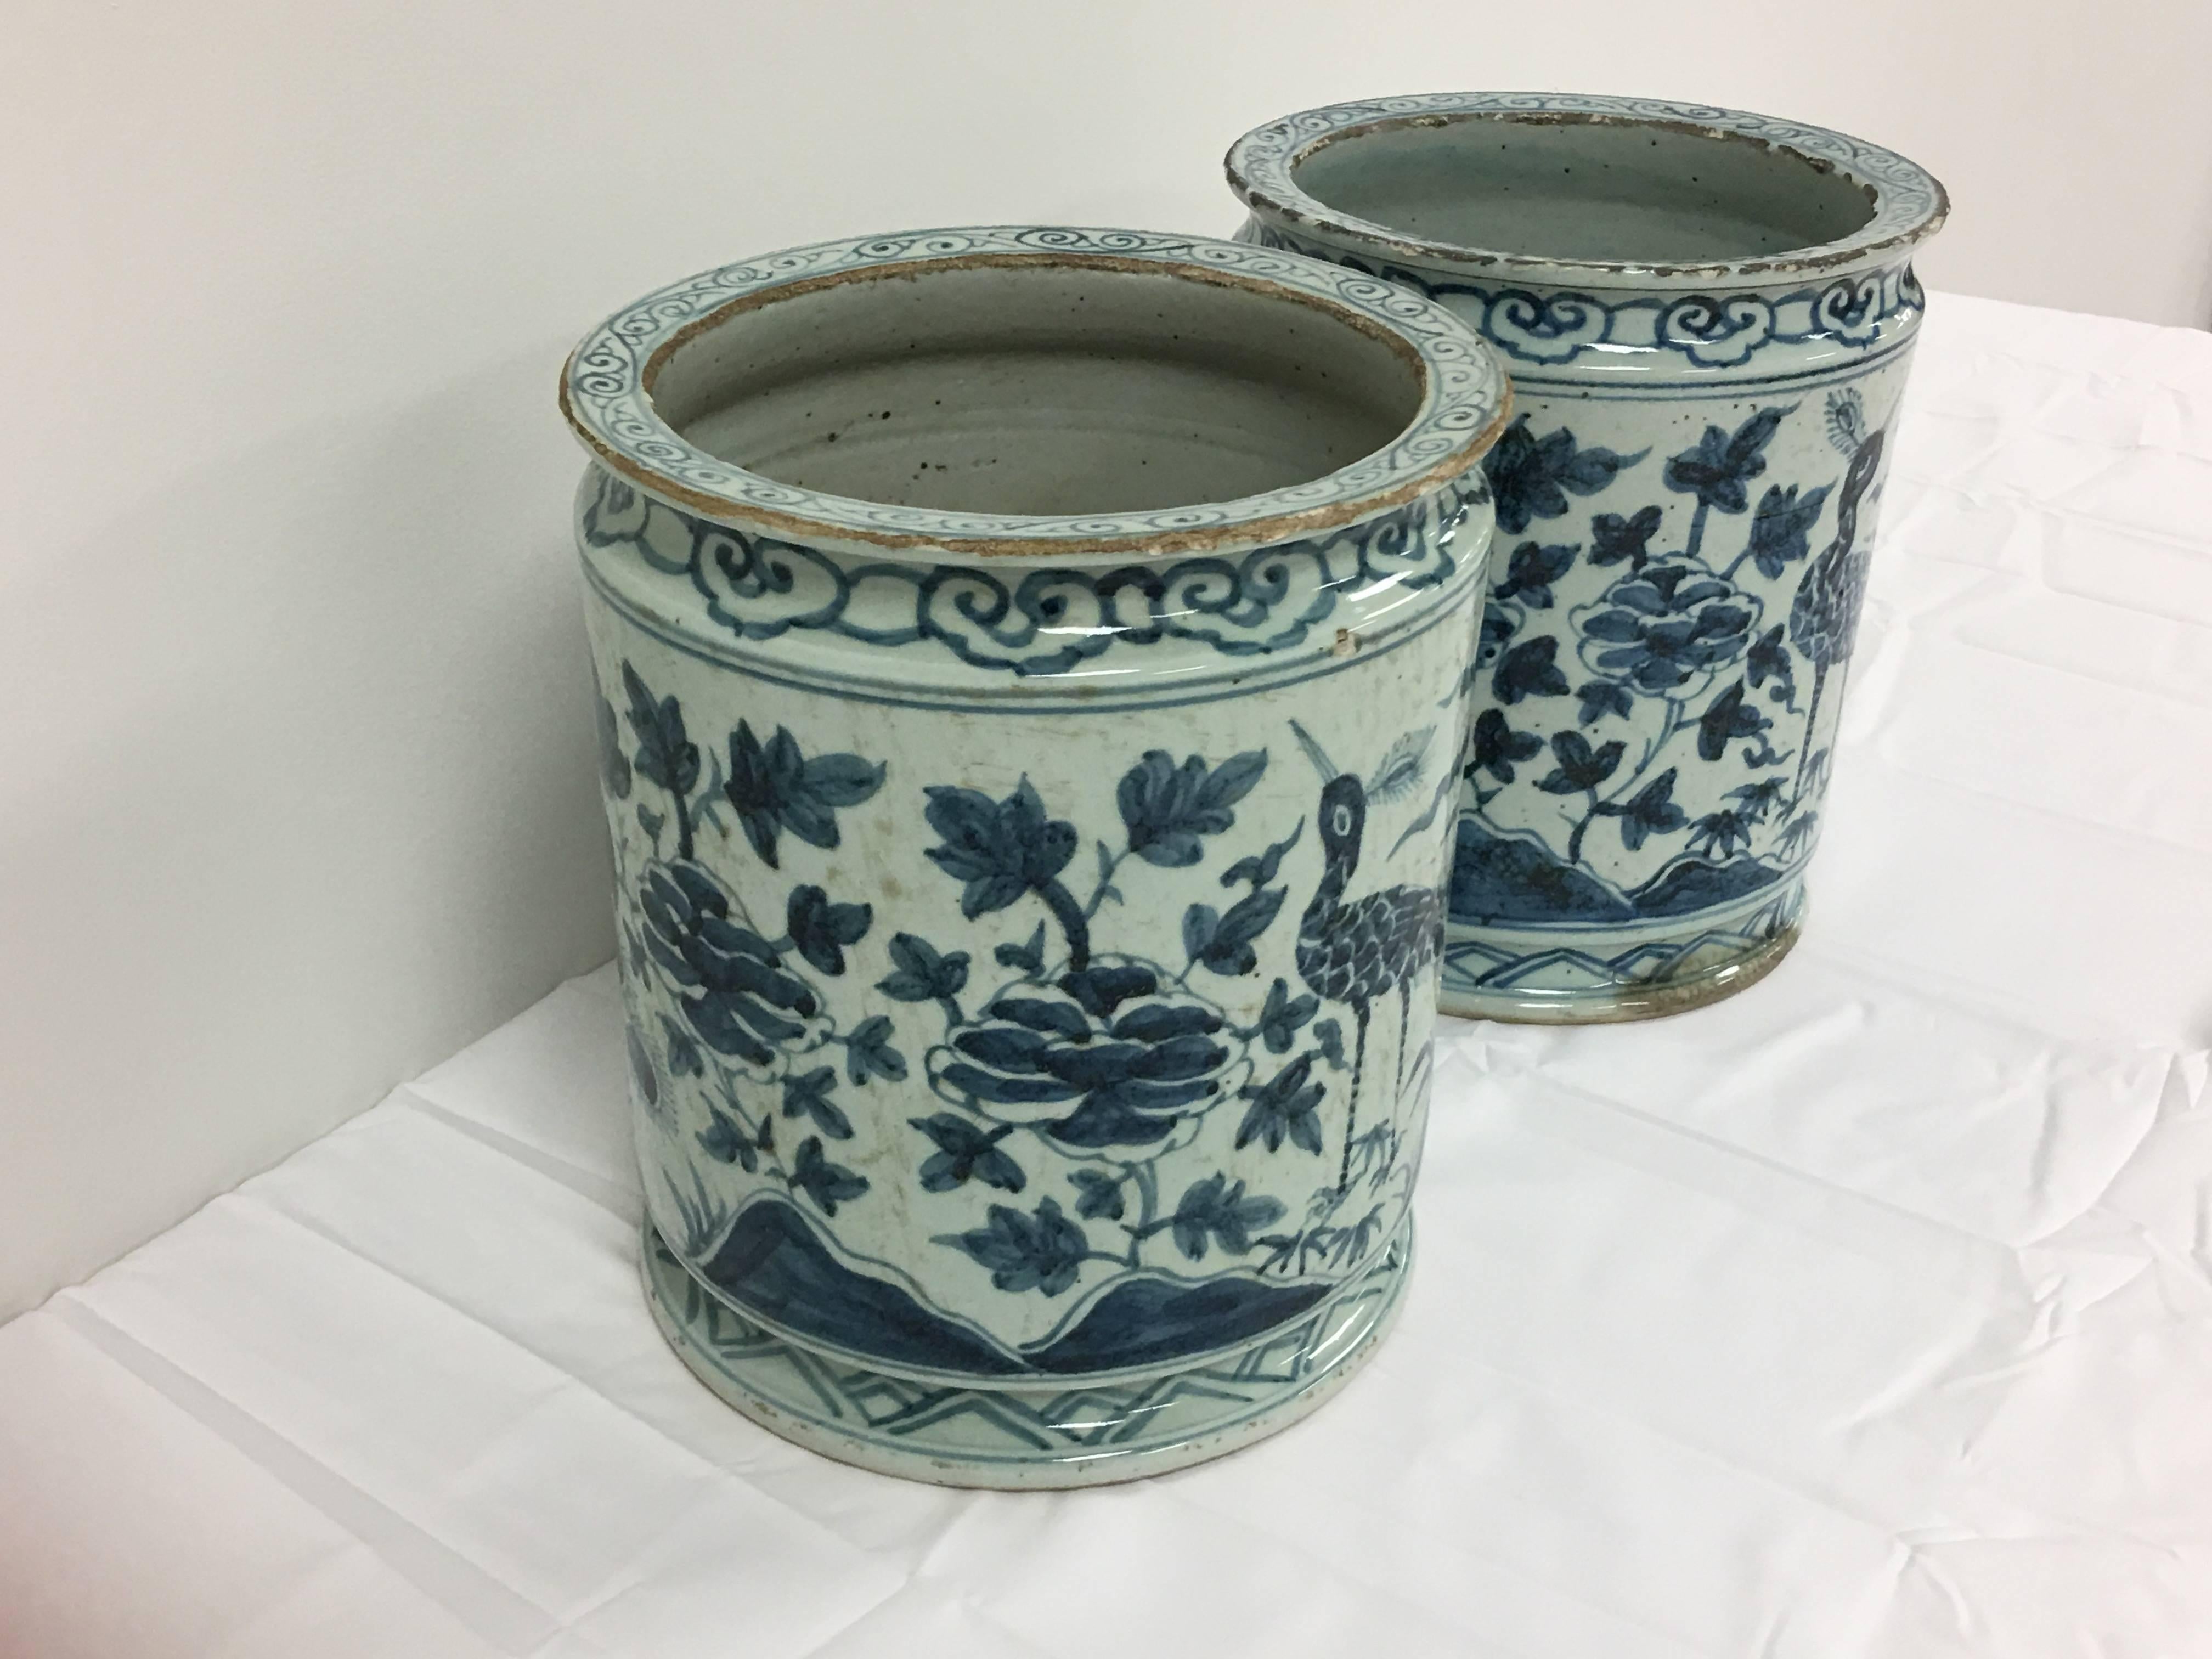 A fabulous pair of antique, blue and white Asian planters. The pair has a gorgeous peacock and floral motif that wraps around. These would be perfect indoors or out!